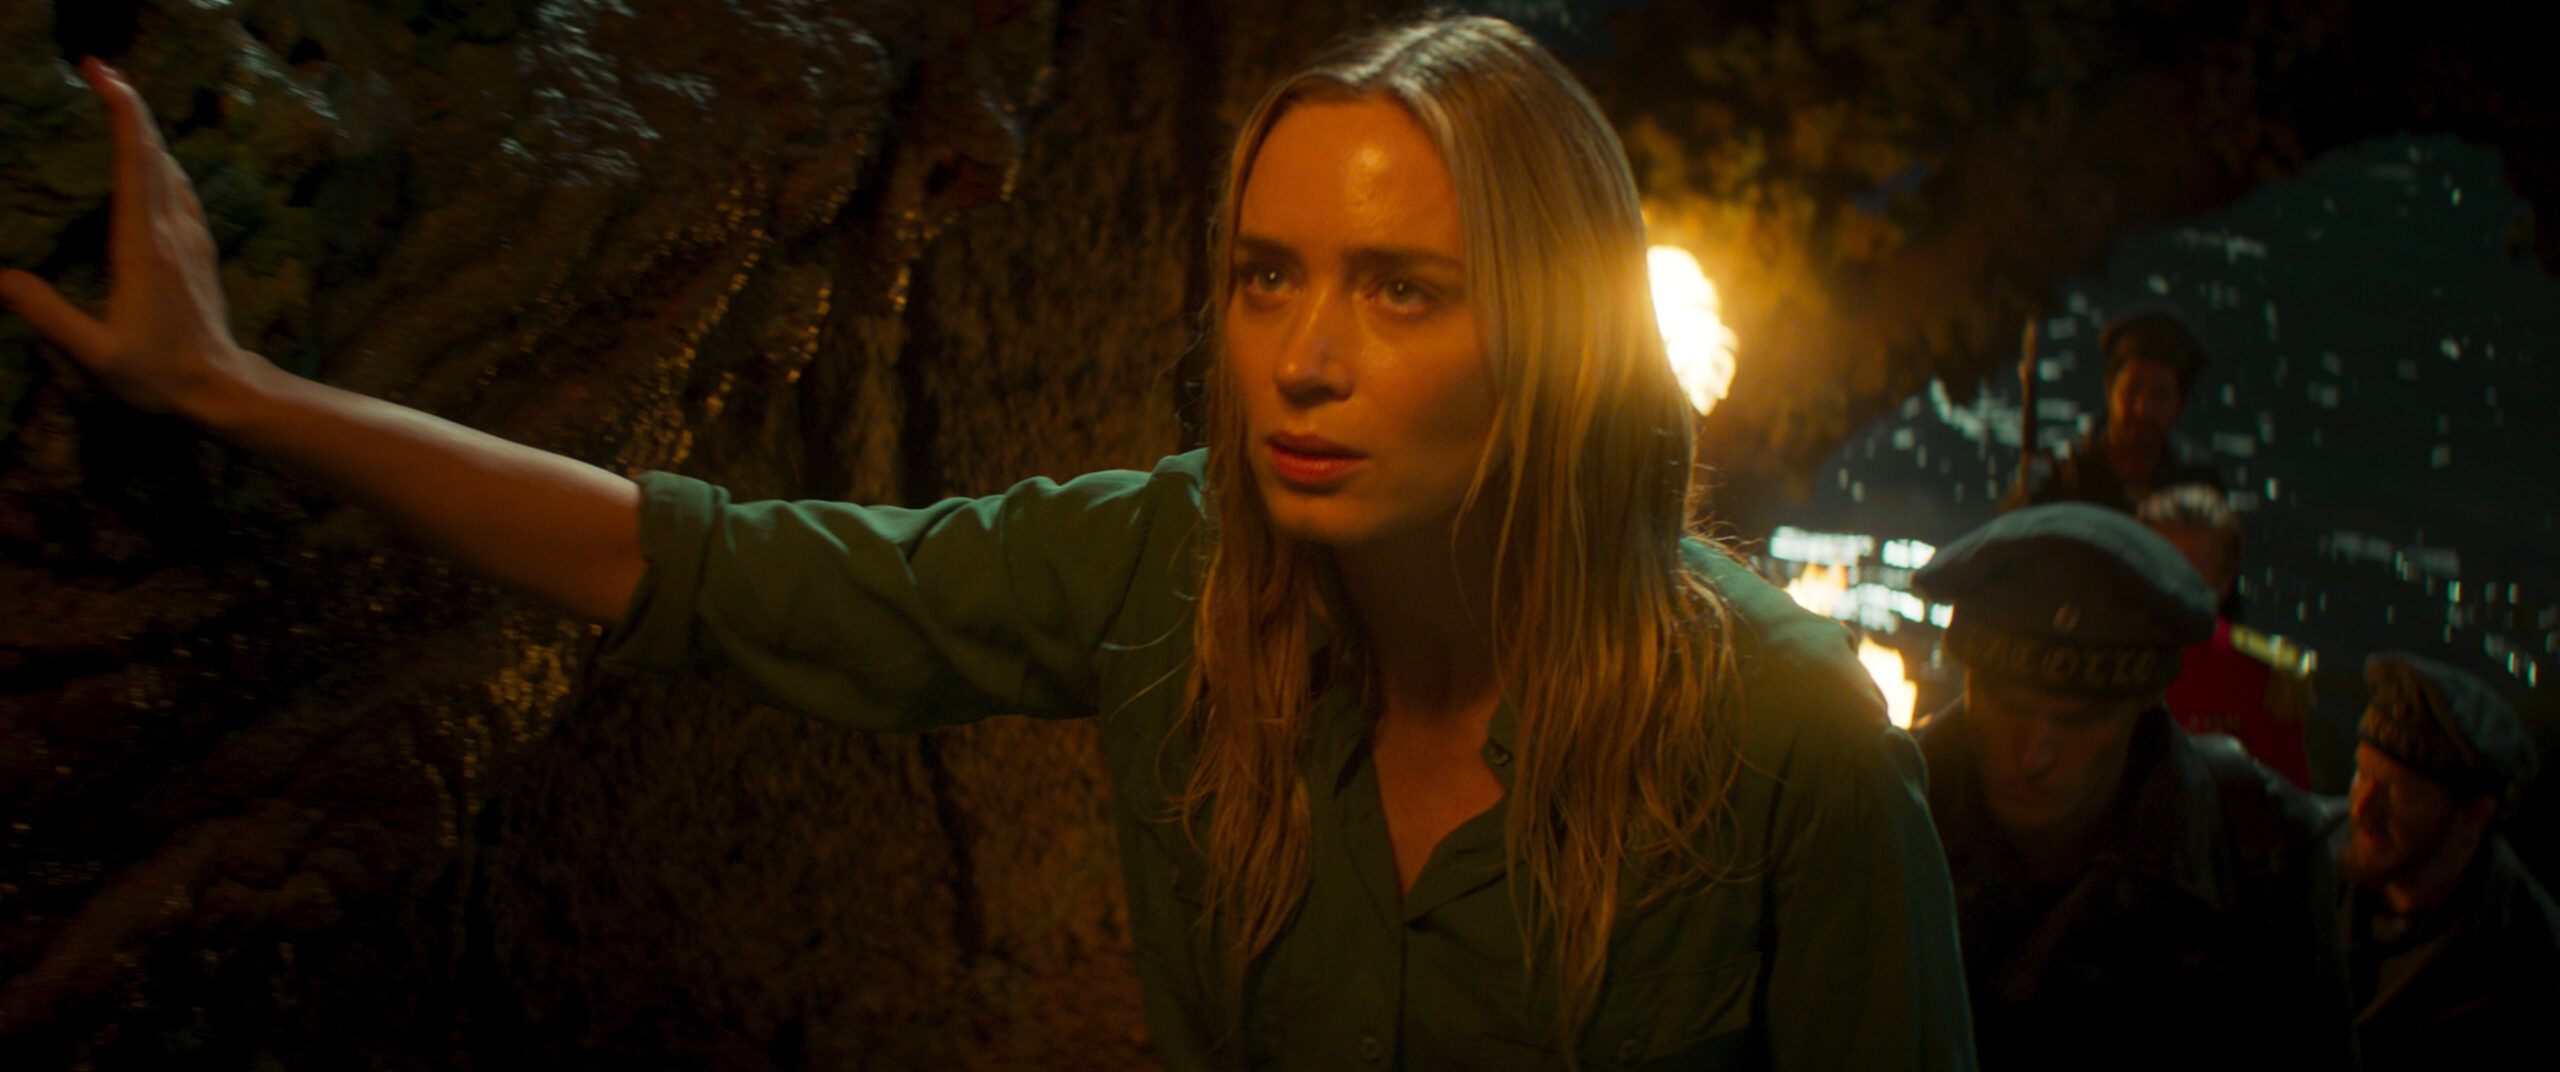 Emily Blunt as Lily Houghton in Disney’s JUNGLE CRUISE. Photo courtesy of Disney. © 2021 Disney Enterprises, Inc. All Rights Reserved.